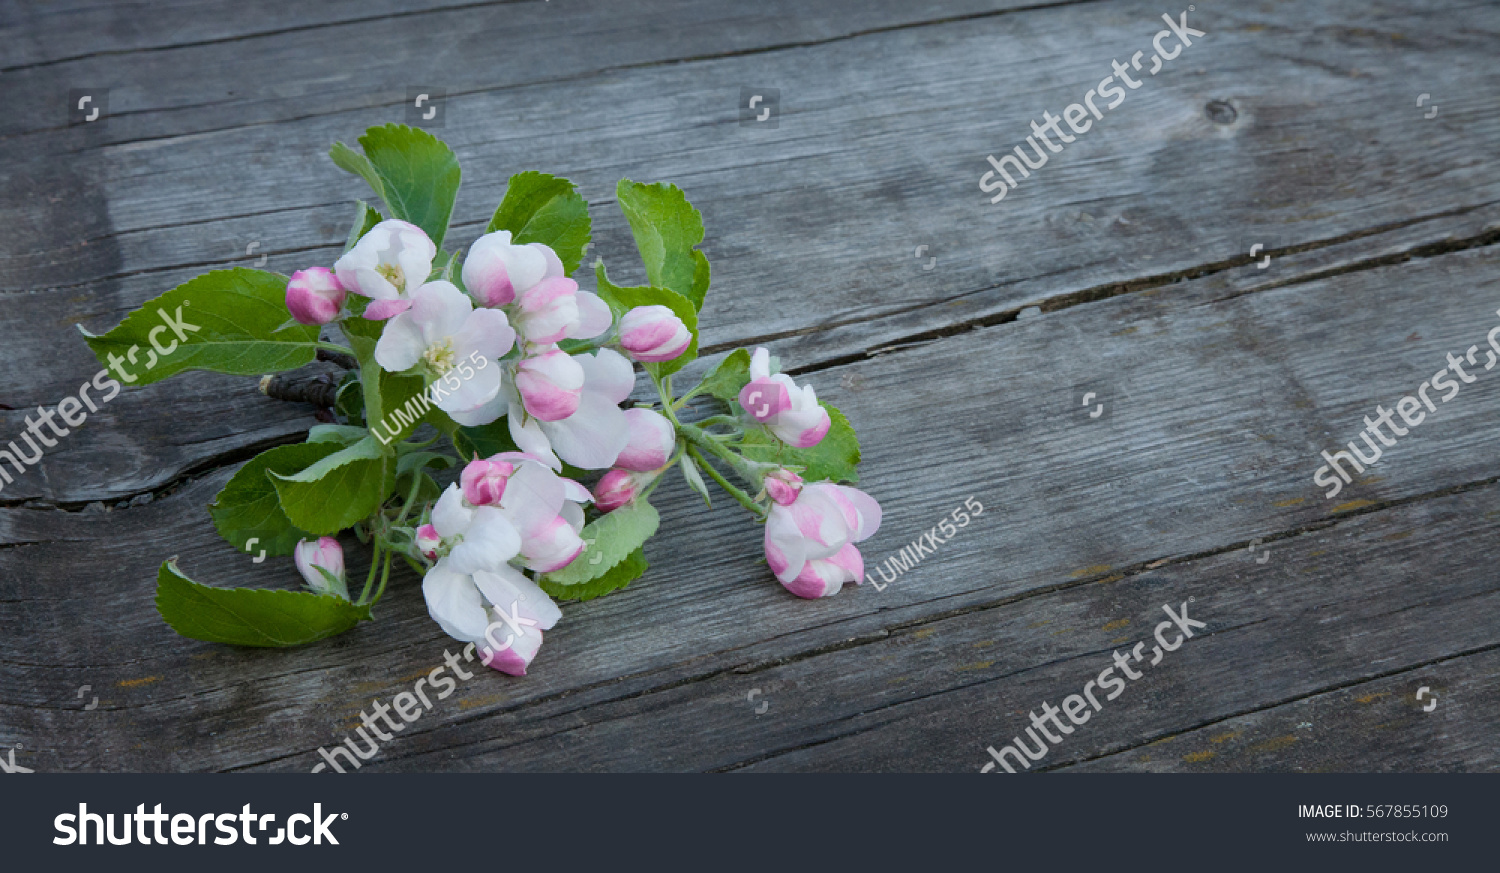 Beautiful wood background with Apple flowers lying on the old brown wooden texture. Springtime. Amazing Web banner Wide Horizontal Image With Copy Space #567855109